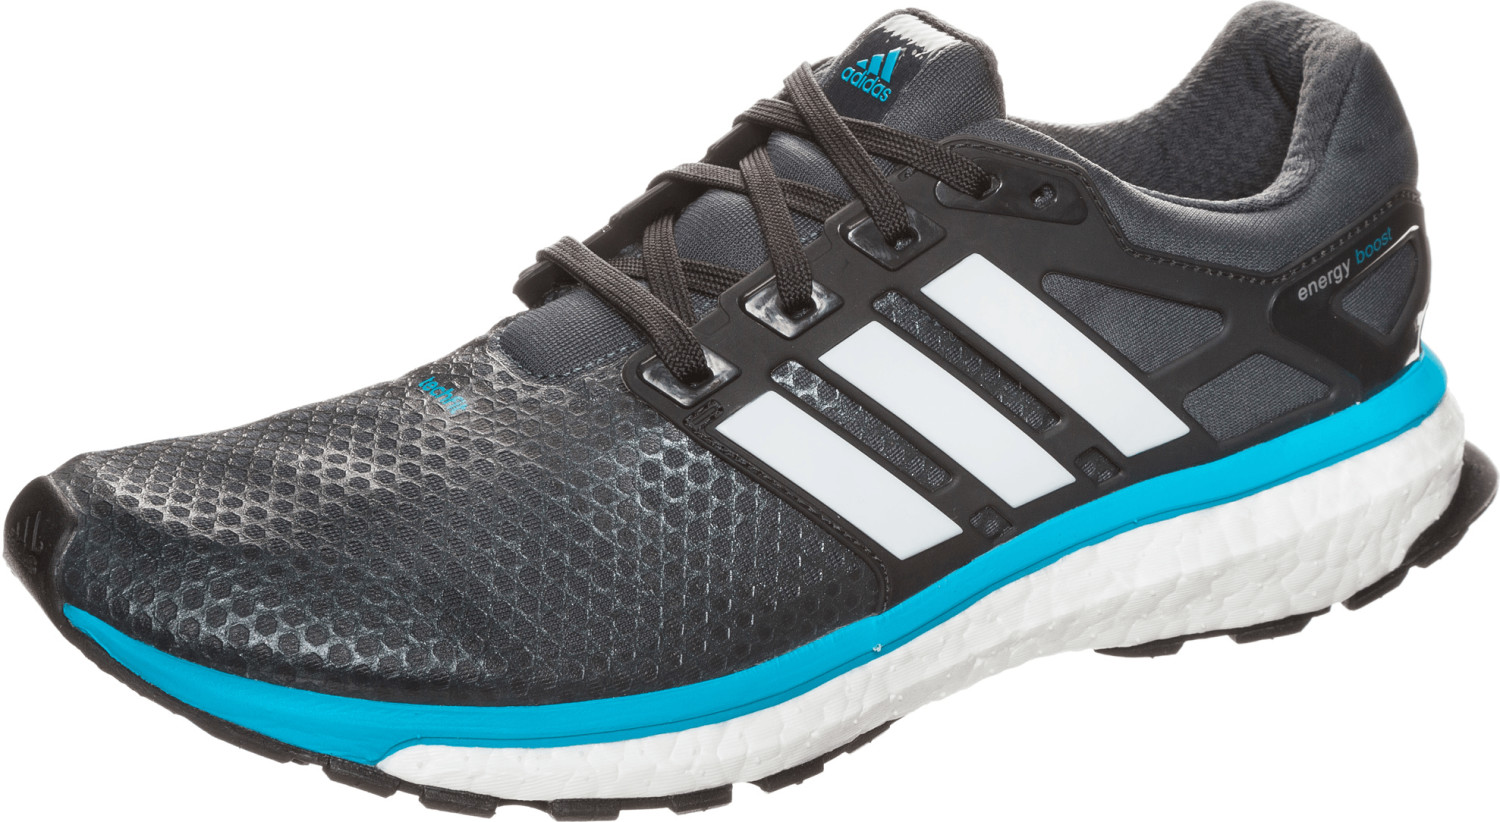 Buy Adidas Energy Boost 2.0 ATR £79.99 (Today) – Best Deals on idealo.co.uk